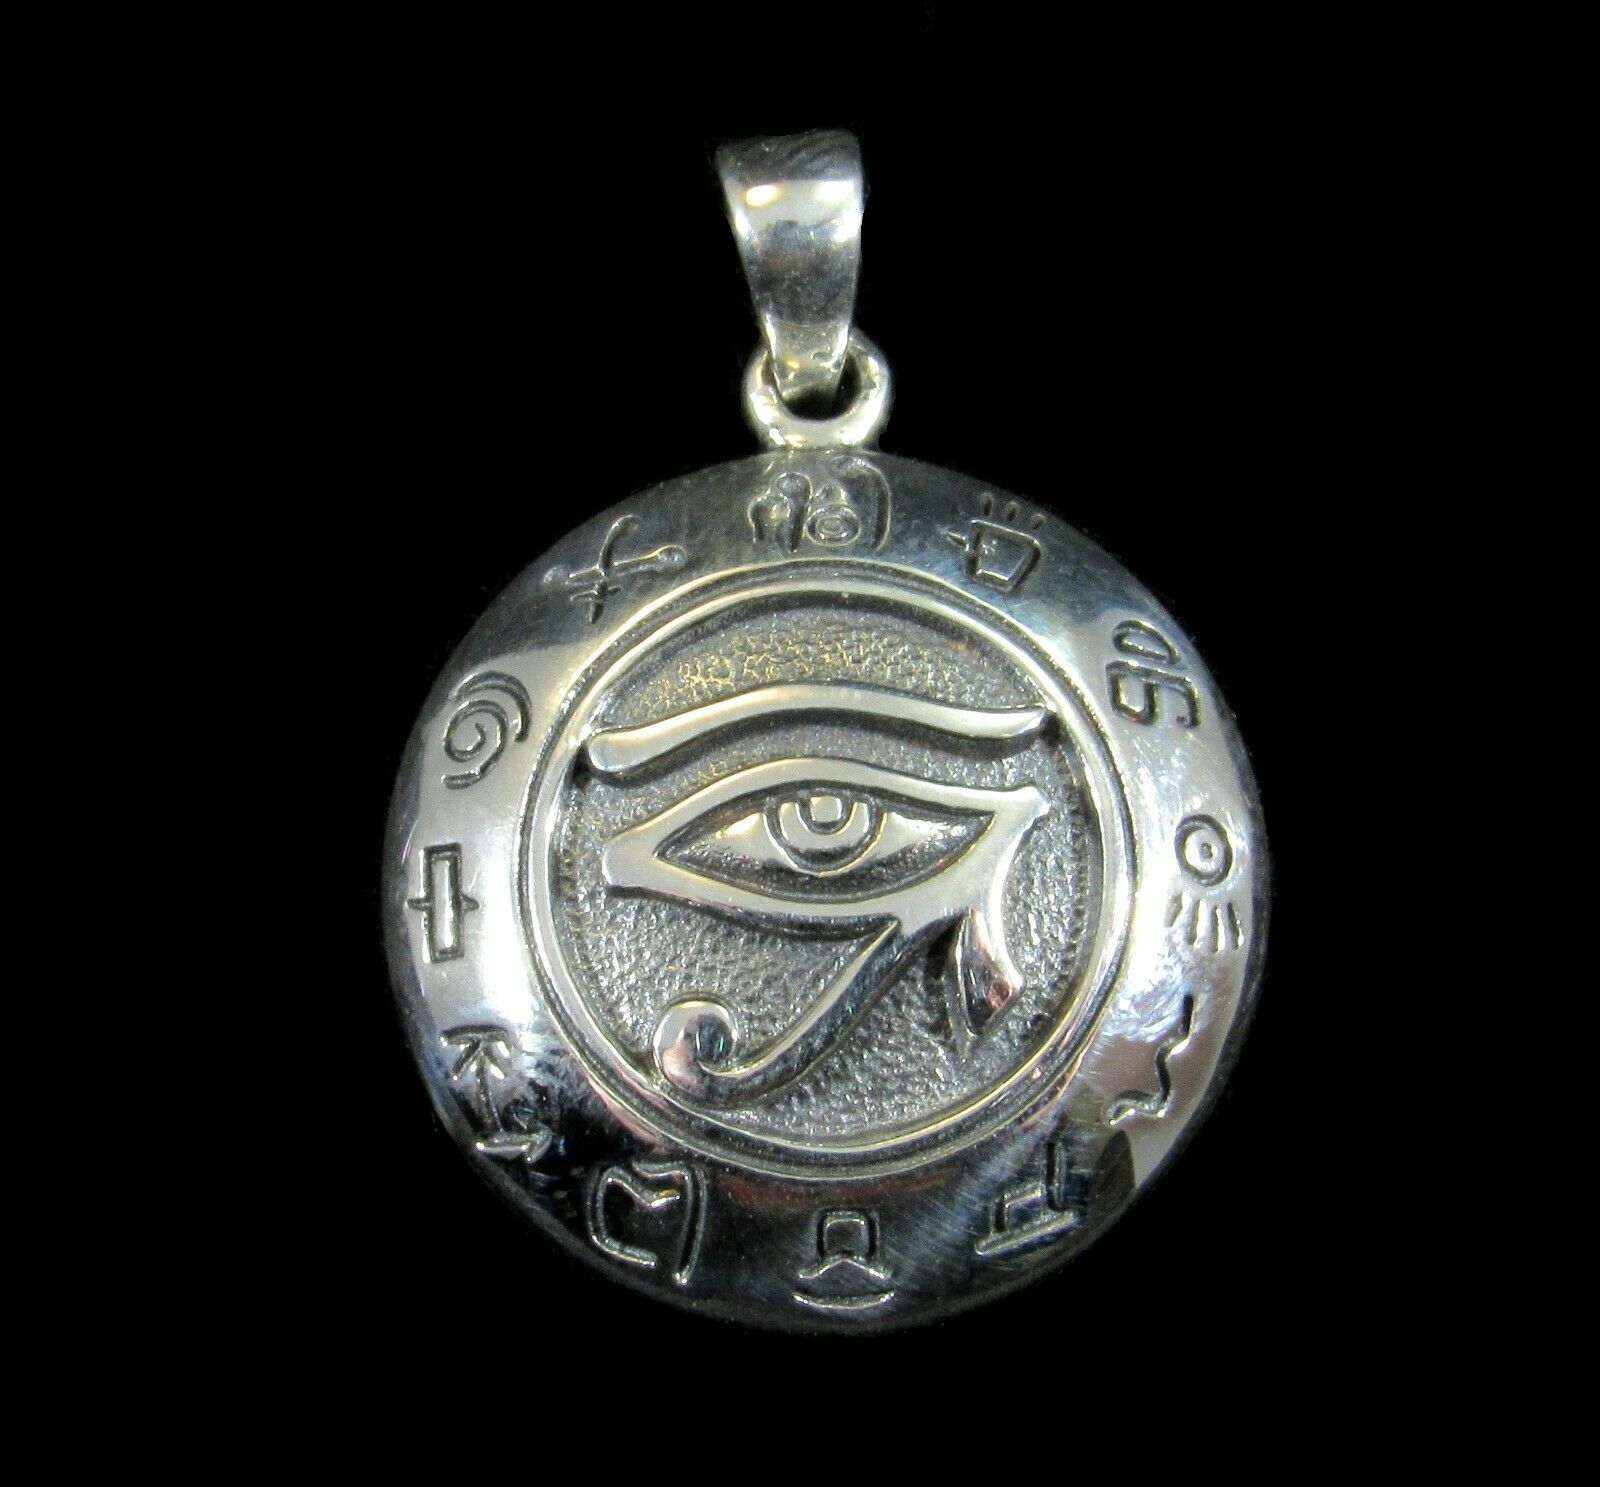 Handcrafted Solid 925 Sterling Silver Eye of Horus with Zodiac Symbols Pendant